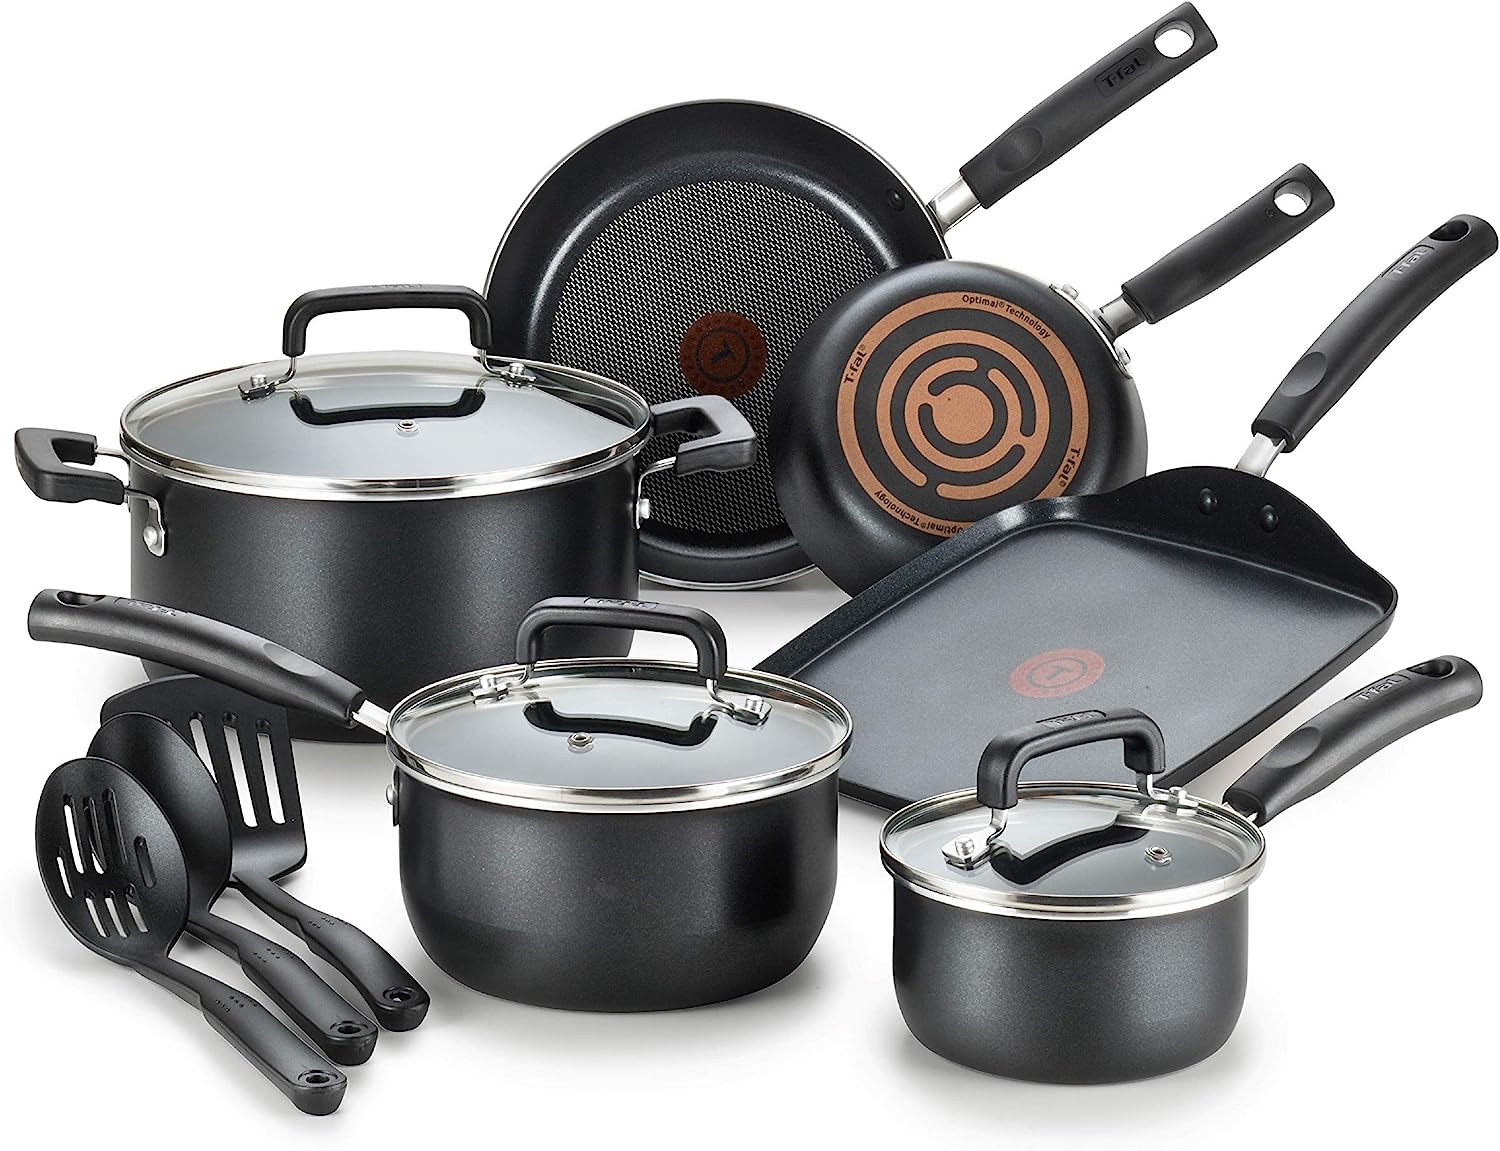 T-fal Experience Nonstick Cookware Set 12 Piece Induction Oven Safe 350F  Pots and Pans, Dishwasher Safe Black